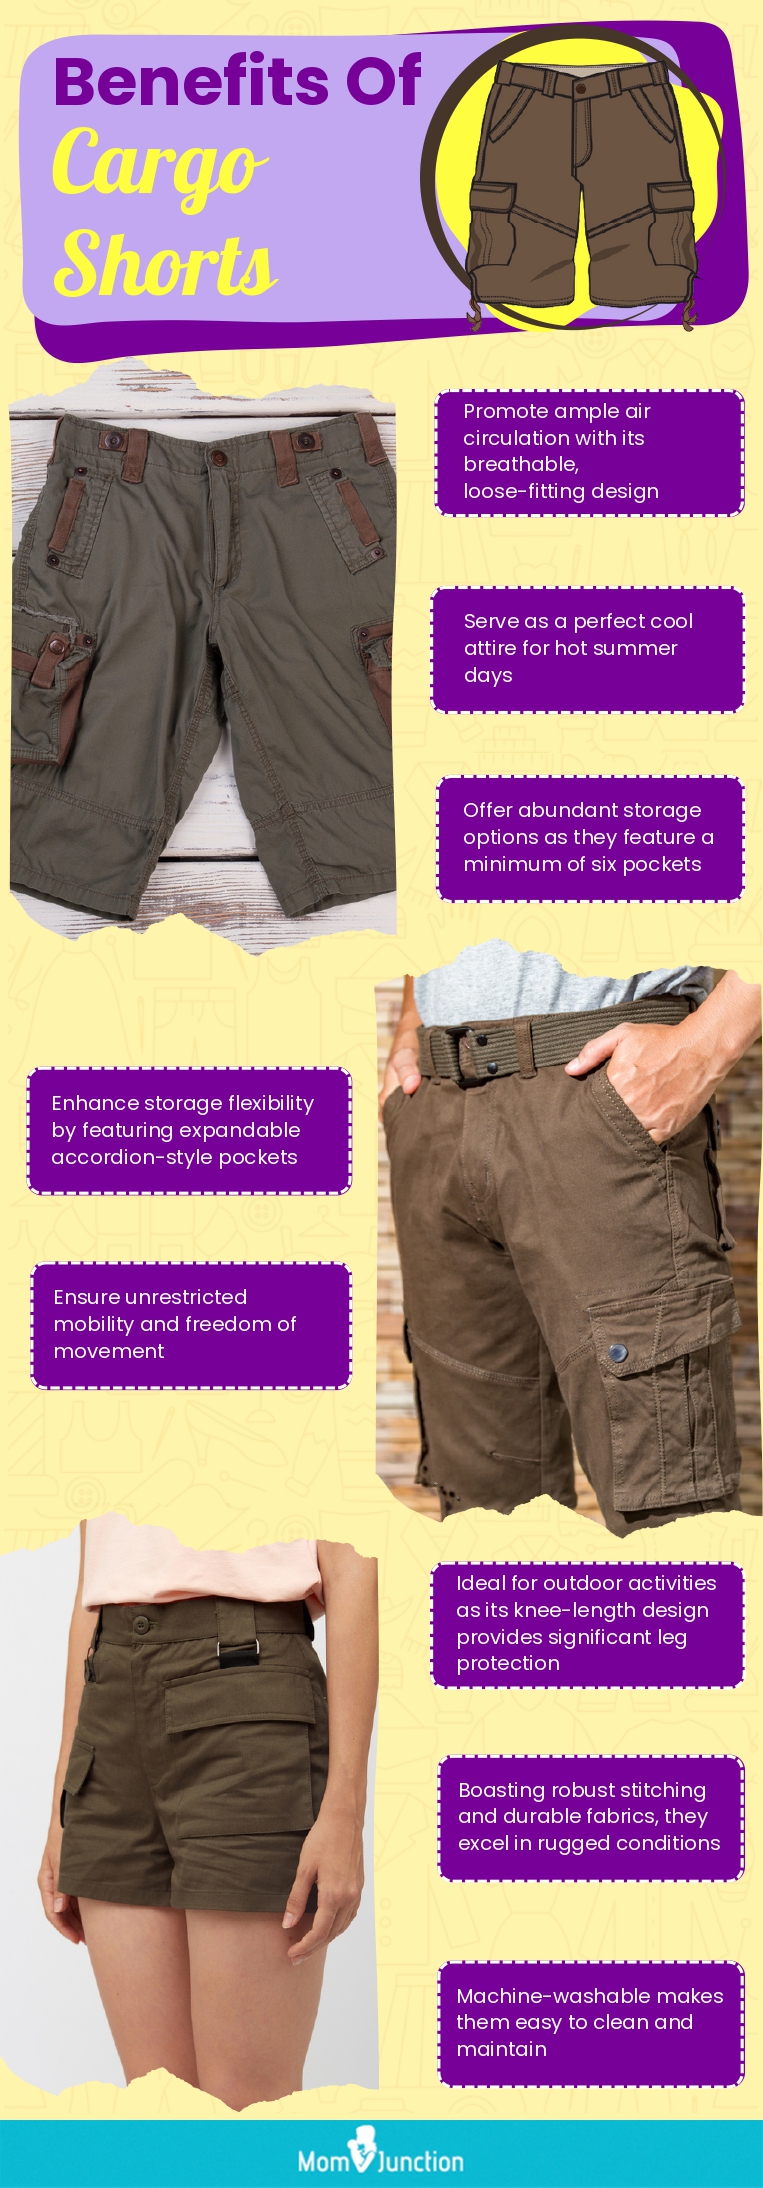 Benefits Of Cargo Shorts (infographic)